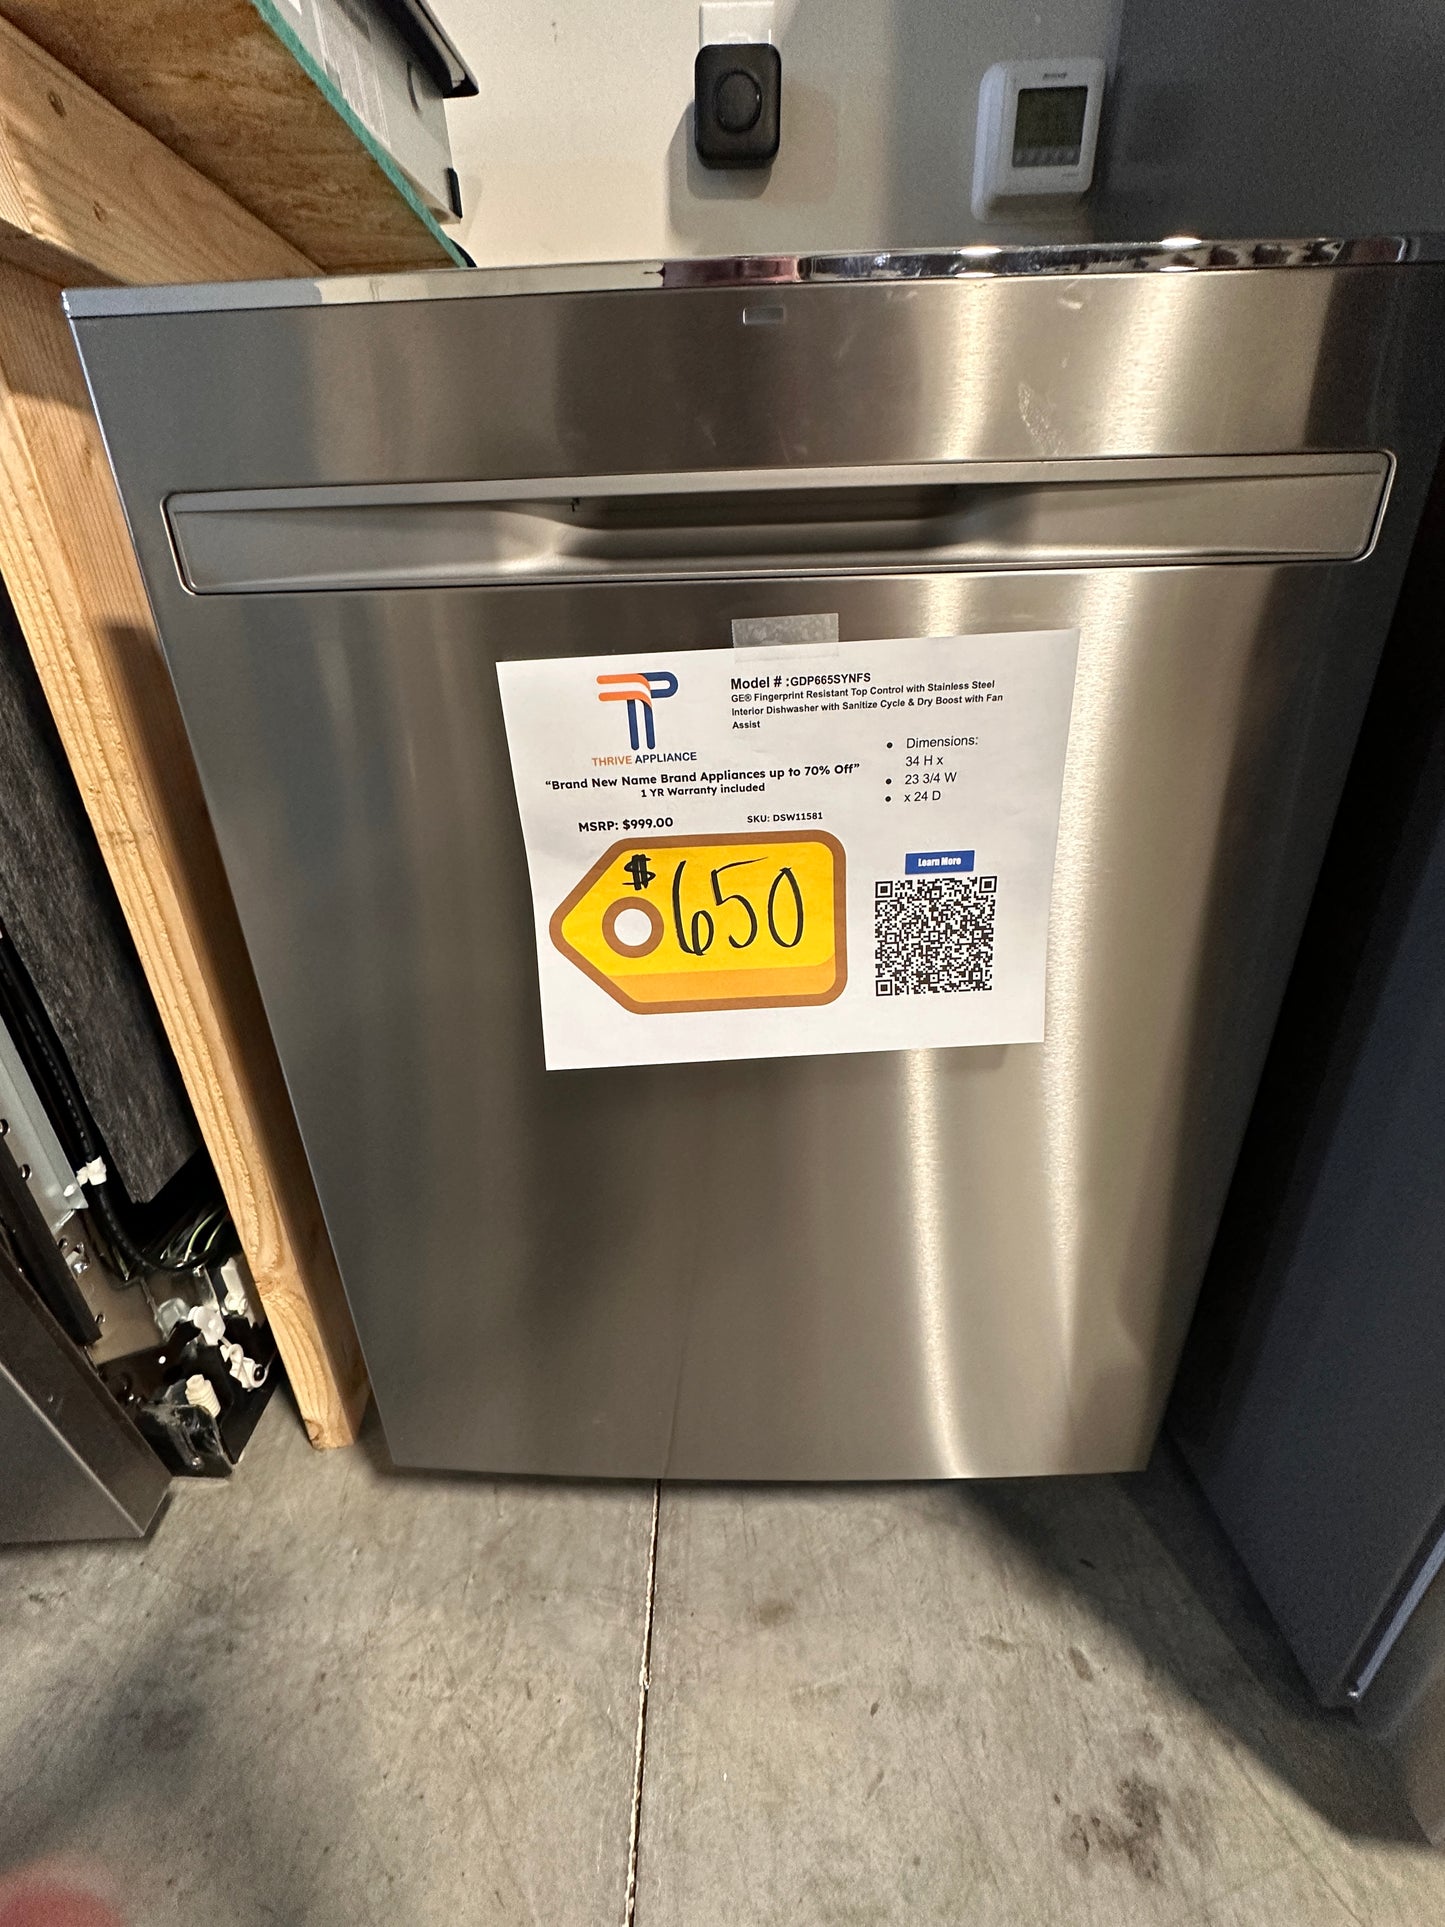 NEW GE DISHWASHER WITH HIDDEN CONTROLS - DSW11581 GDP665SYNFS